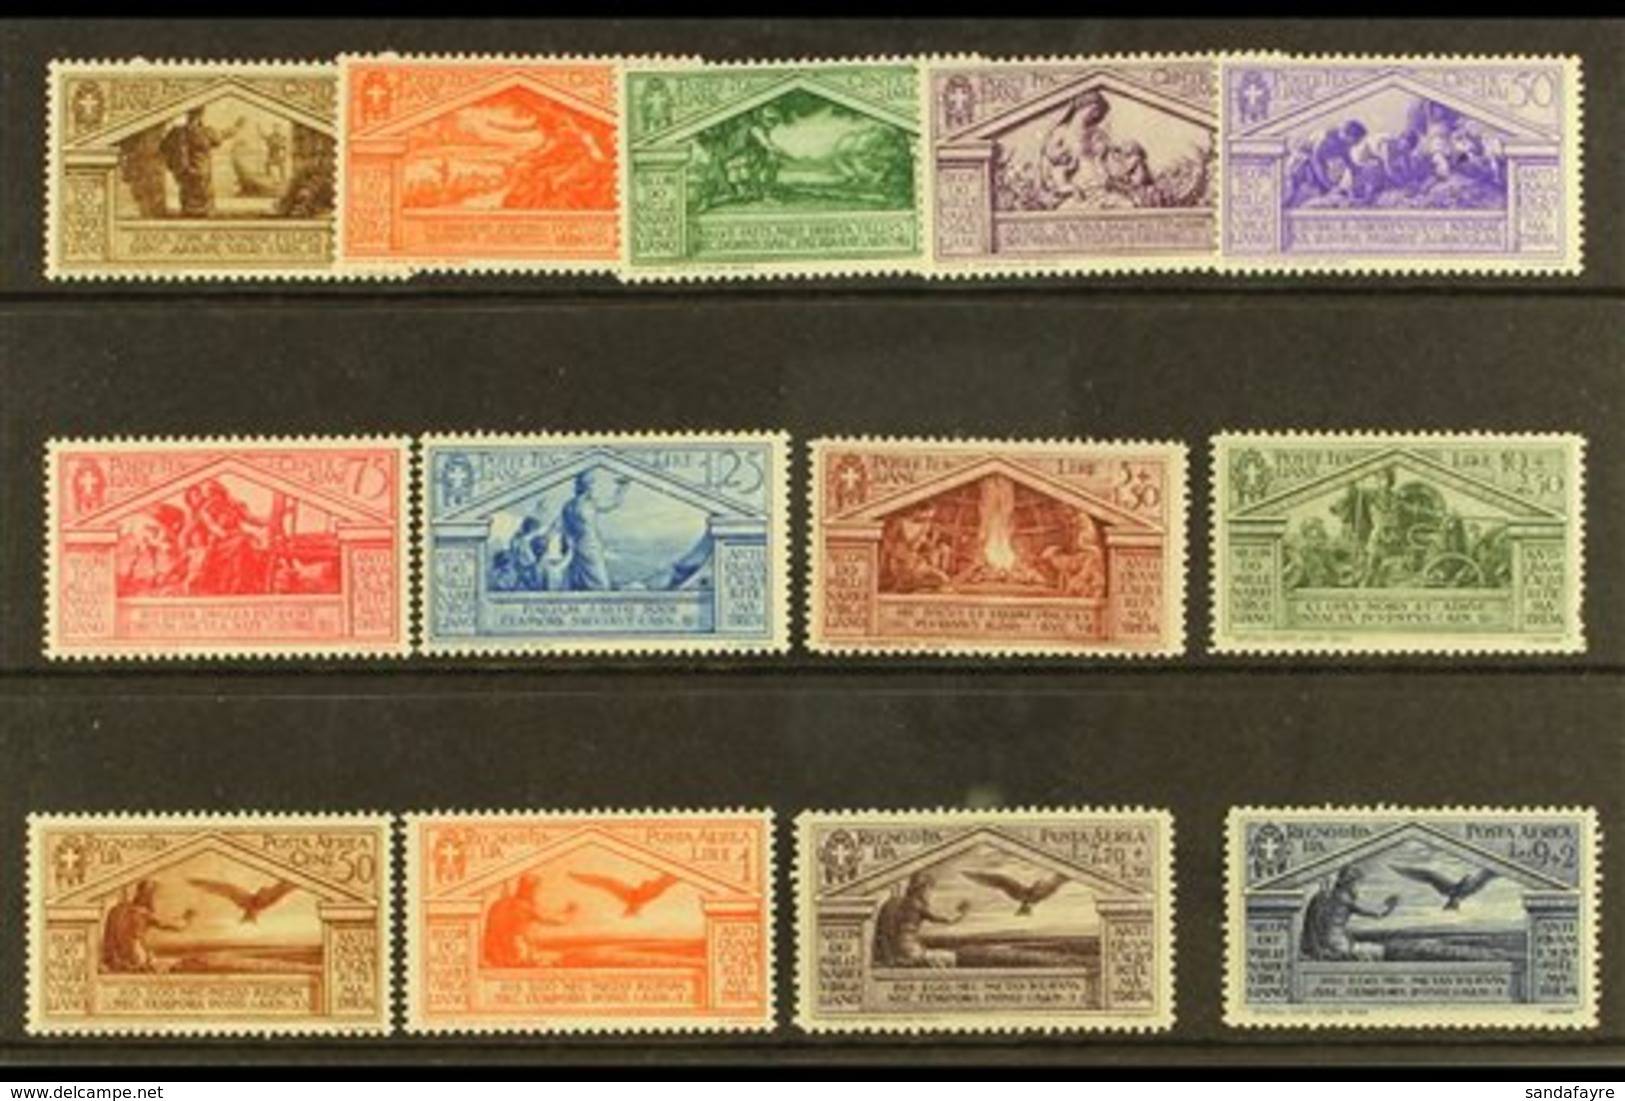 1930  Virgil  Postage And Air Sets Complete, Sass S. 58, Fresh Mint, The 10L Postage With Perf Fault, All Others Very Fi - Unclassified